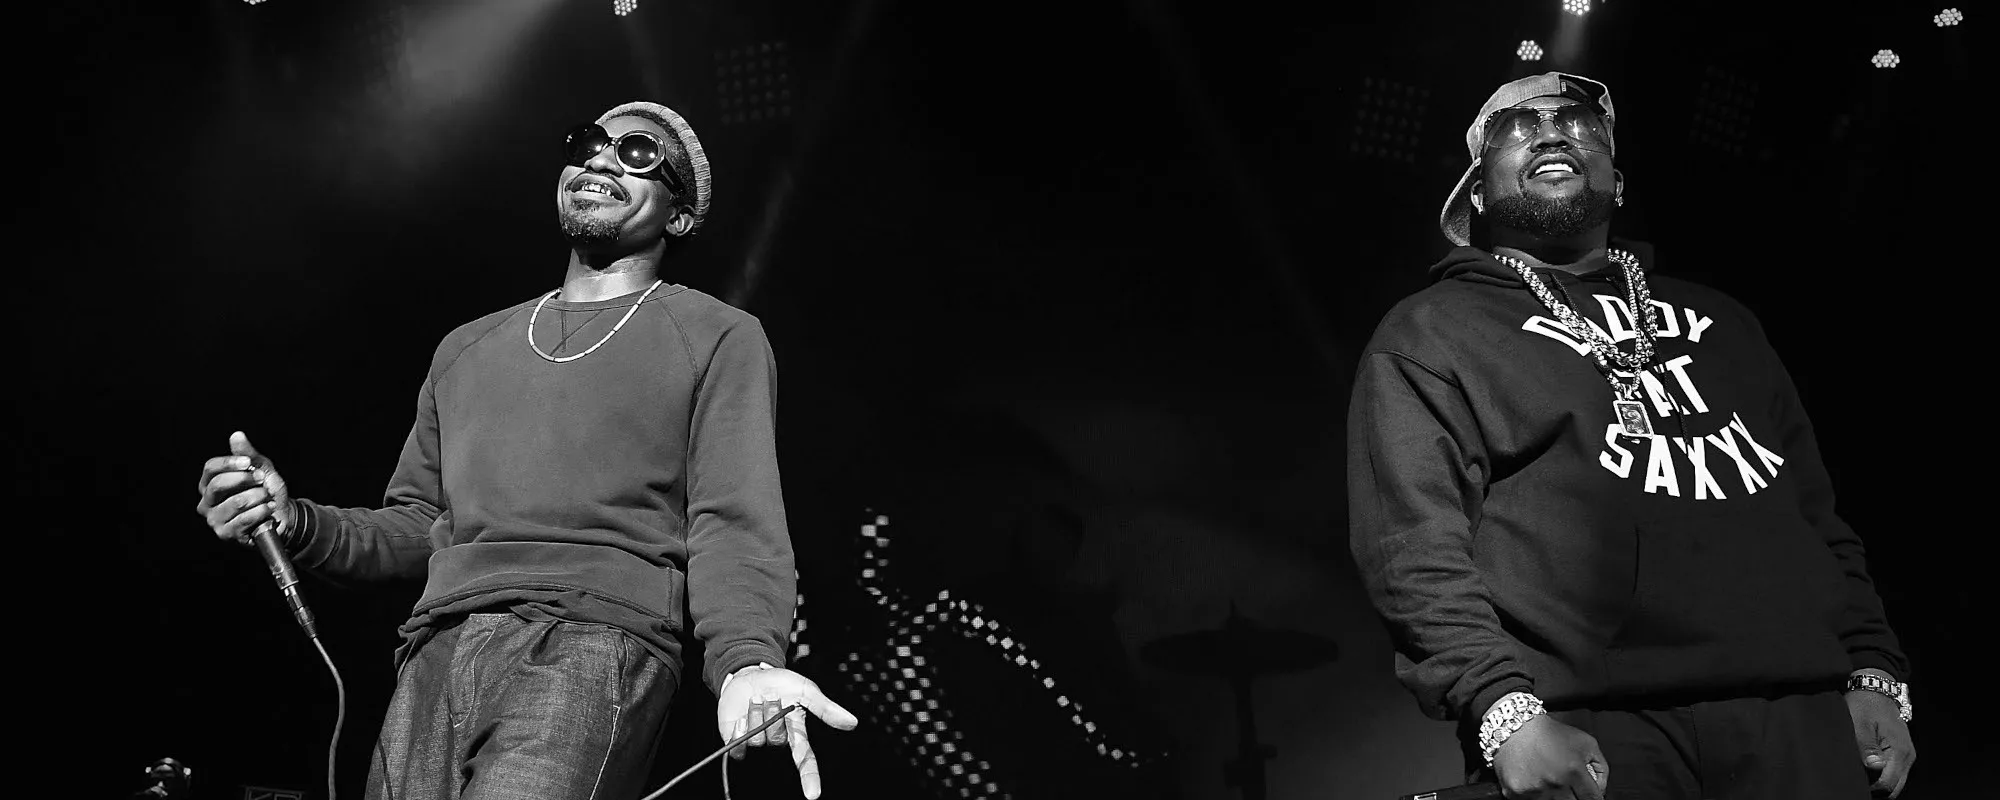 OutKast Celebrate ‘Aquemini’ and ‘Speakerboxxx/The Love Below’ Anniversaries with New Vinyl